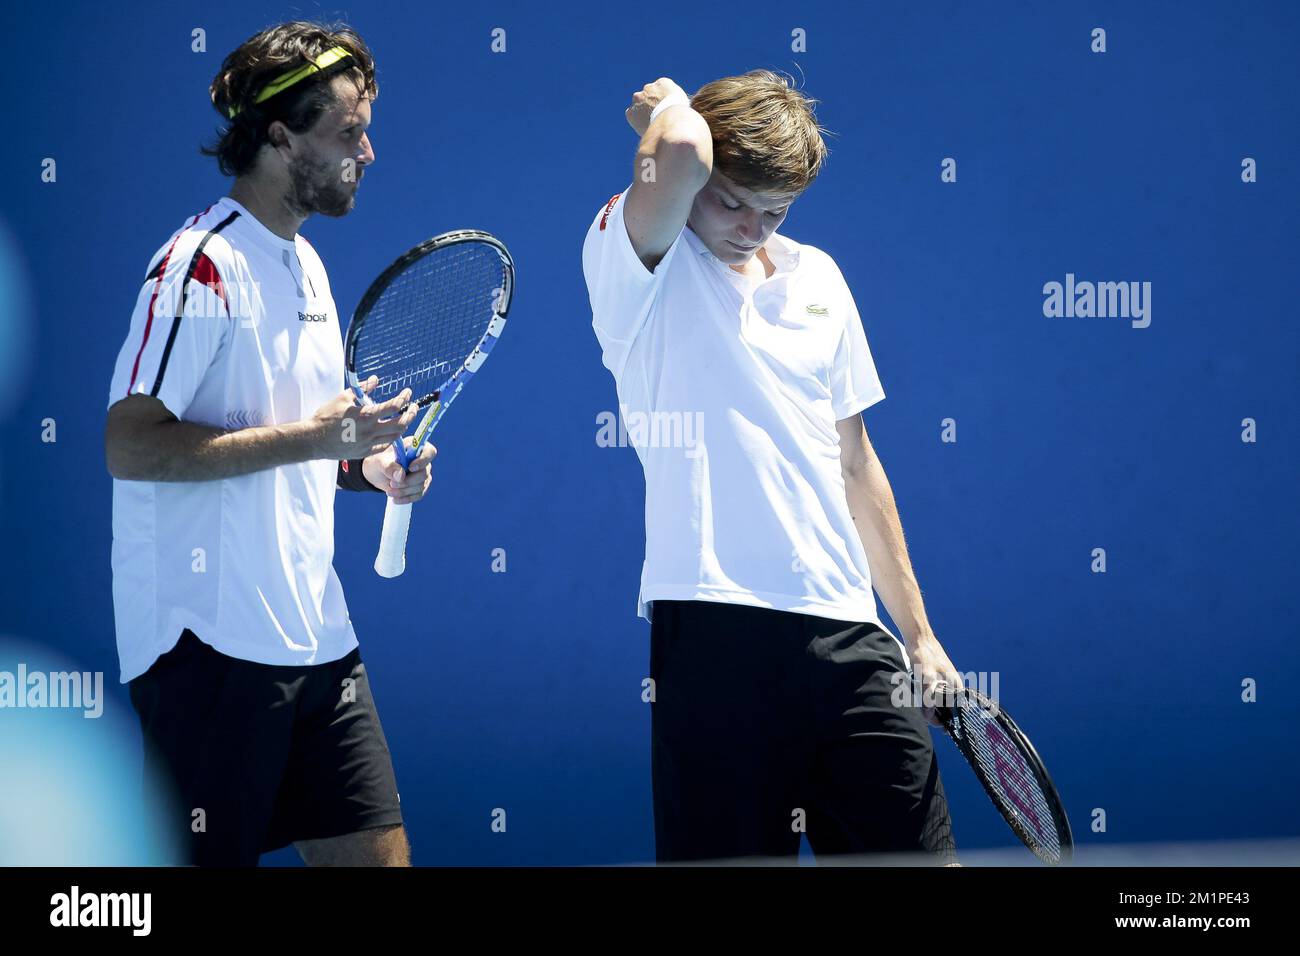 20130116 - MELBOURNE, AUSTRALIA: German Simon Stadler and Belgian David  Goffin pictured during the match between Belgian David Goffin and German  Simon Stadler against Pakistan's Aisam-ul-Haq Qureshi and Dutch Jean-Julien  Rojer, in